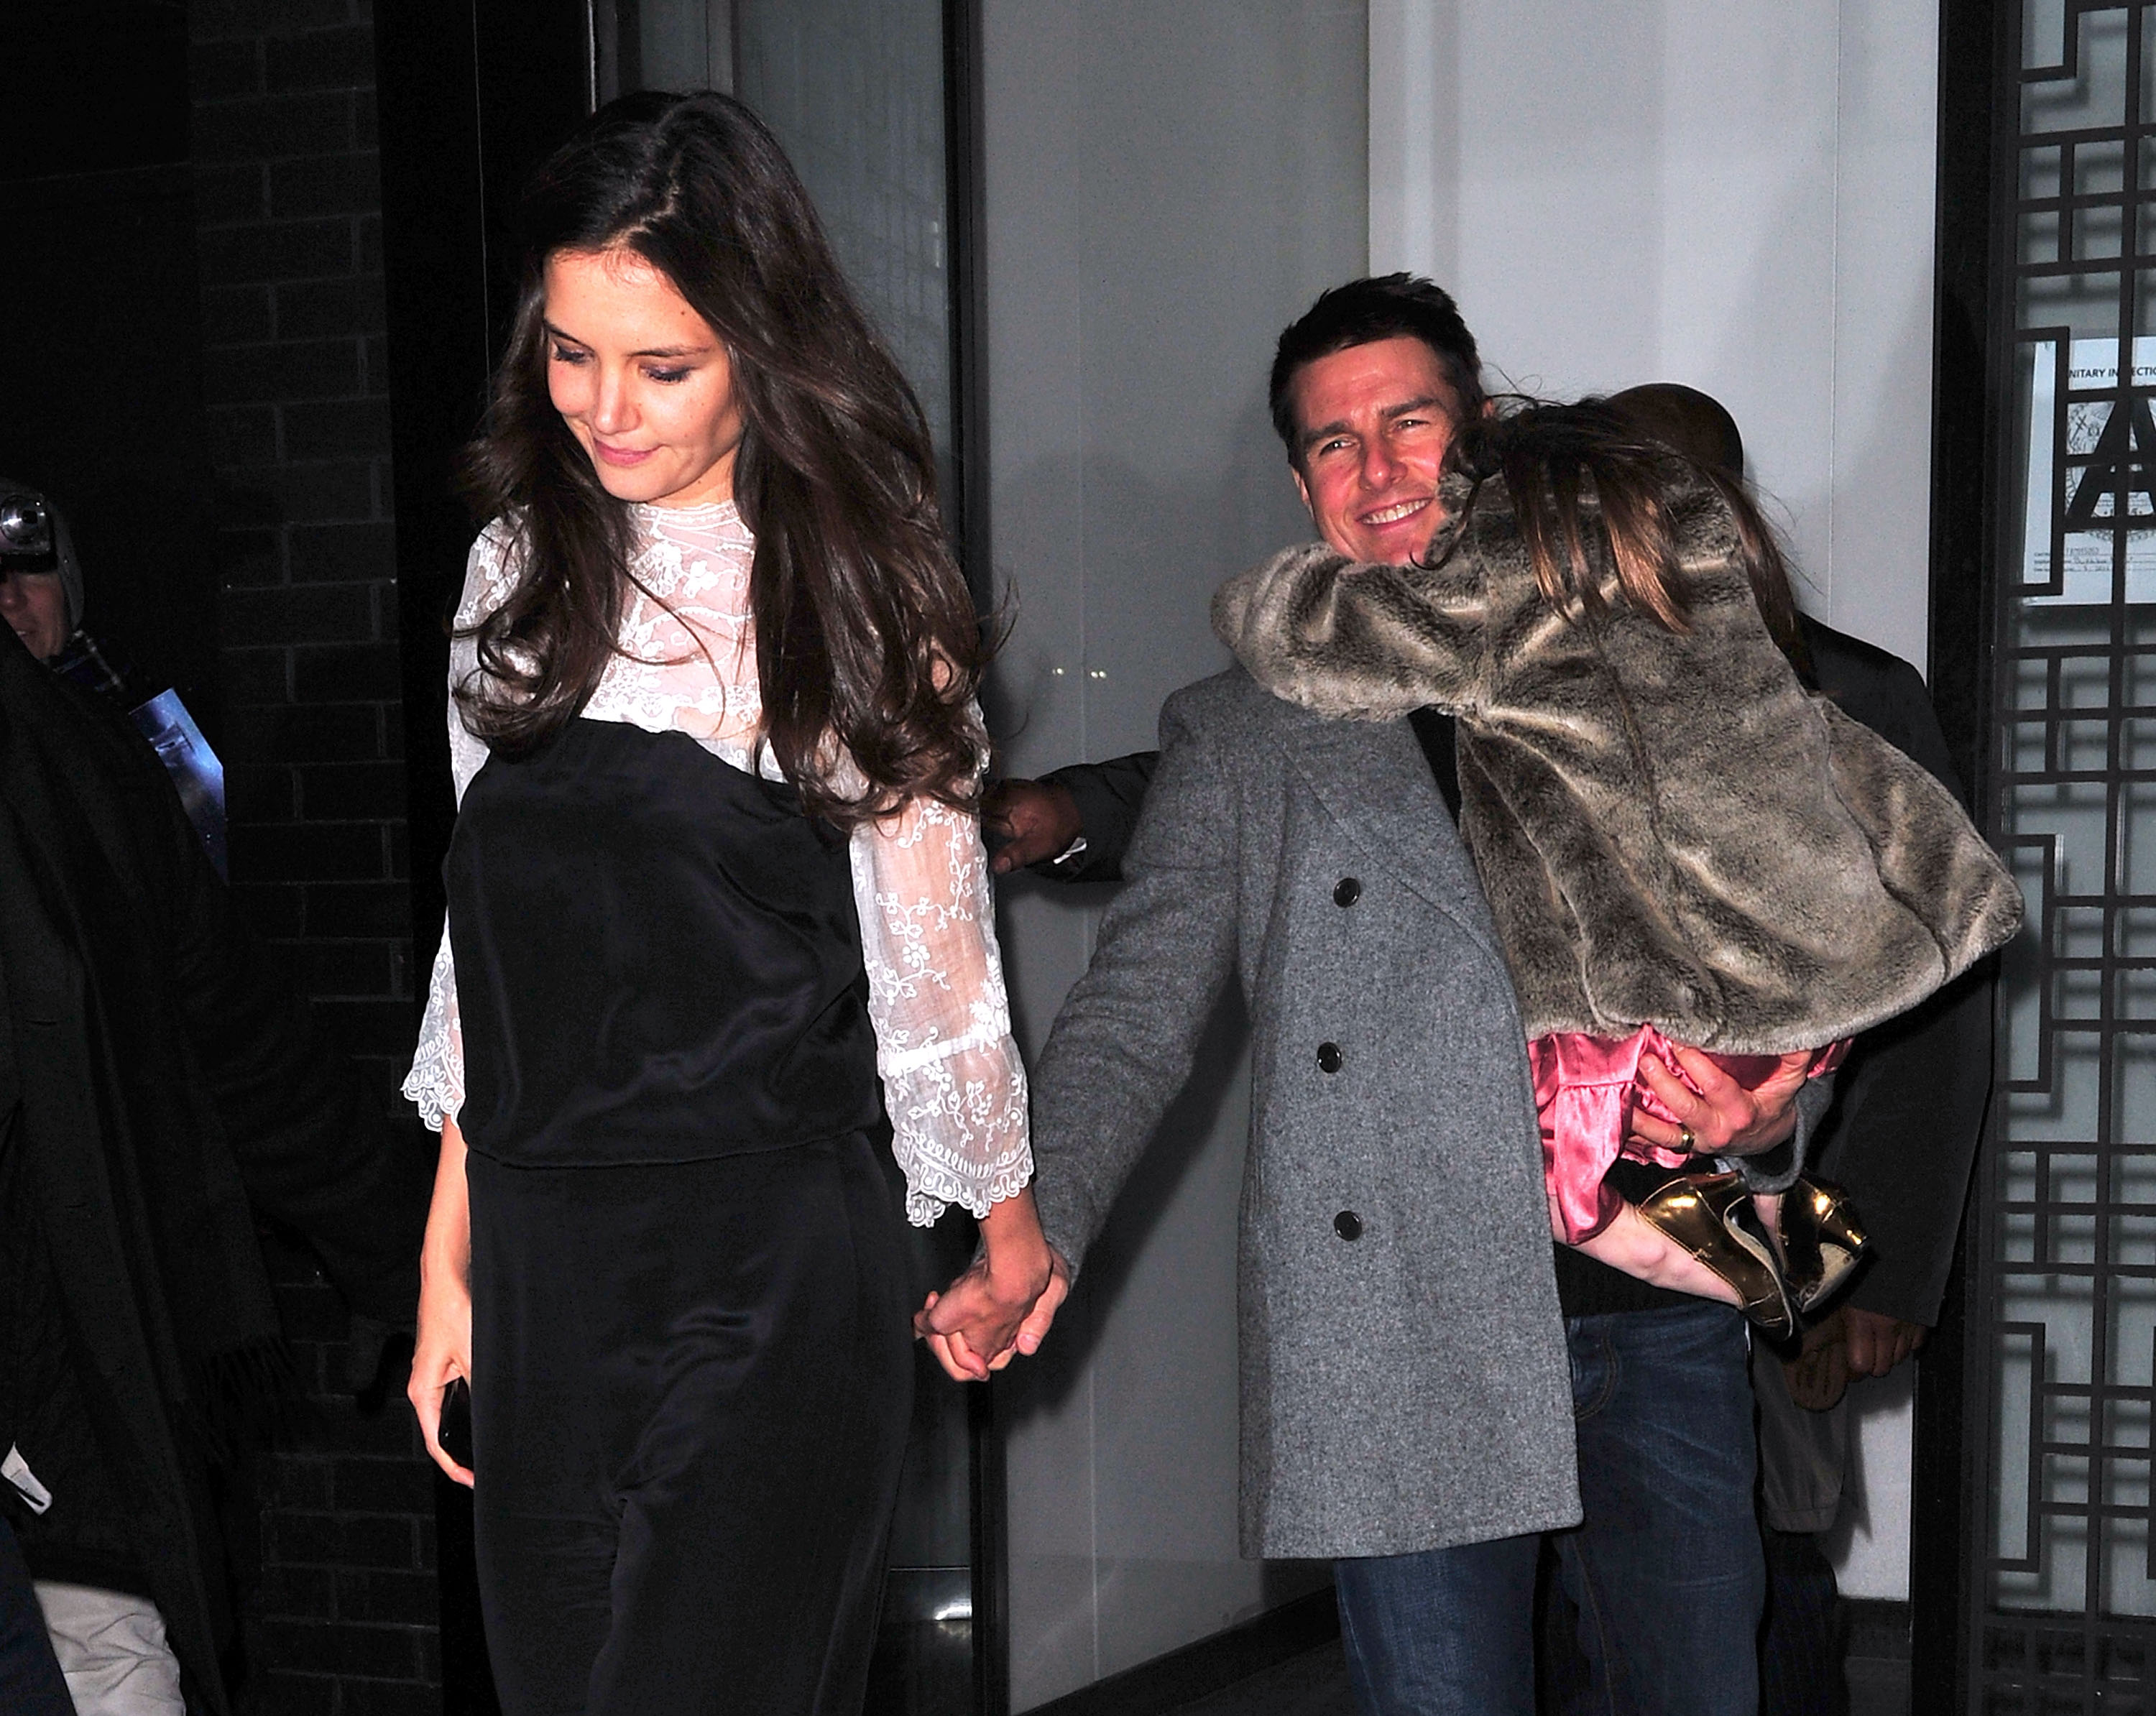 Katie Holmes, Tom Cruise, and Suri Cruise leave Buddakan after celebrating Katie's birthday on December 18, 2011, in New York City | Source: Getty Images